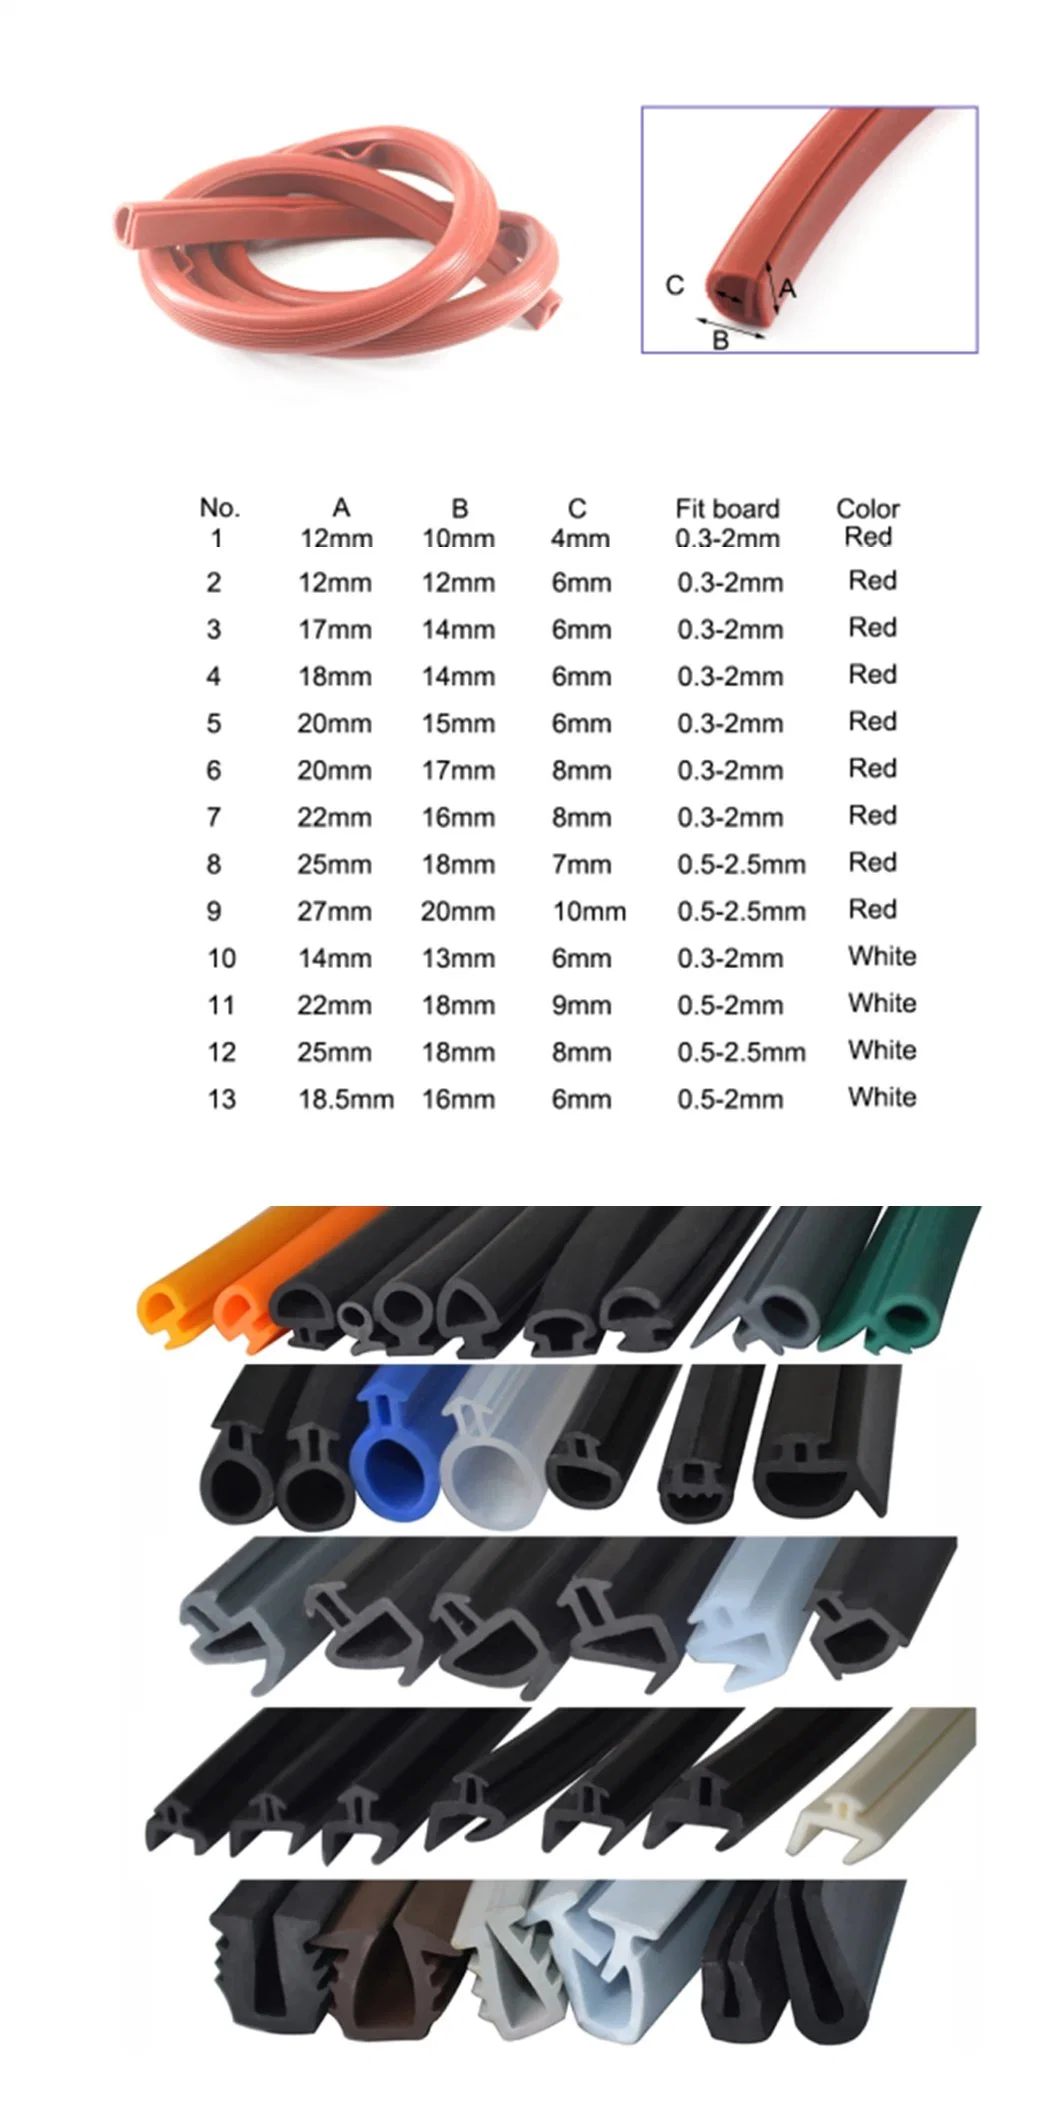 Customized E-Shape Silicone Rubber Sealing Strips by Chinese Quality Product Manufacturers